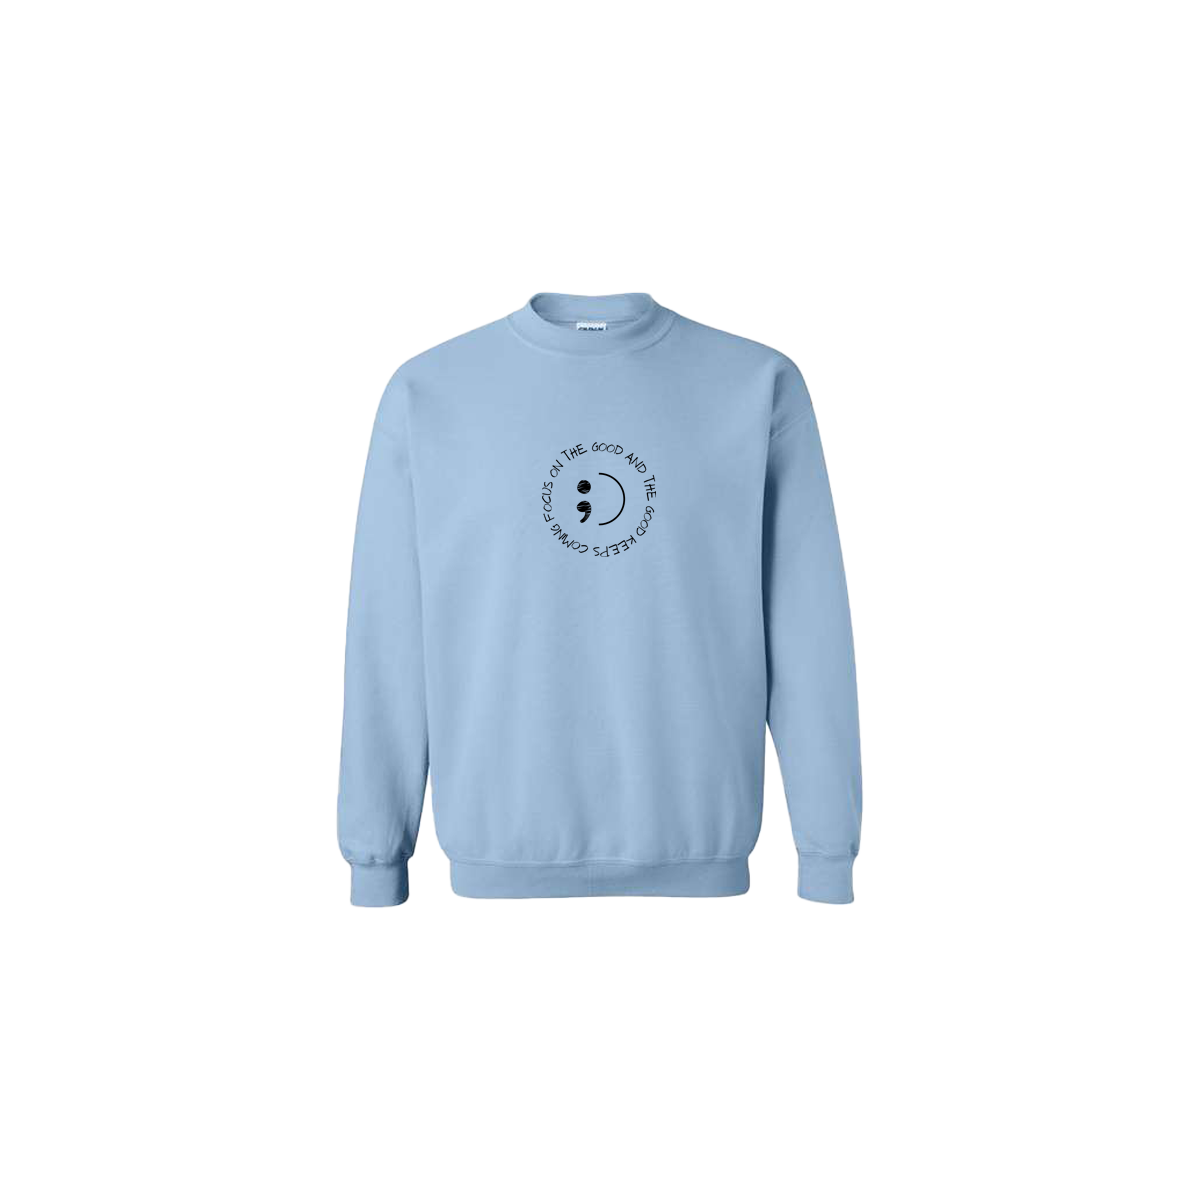 Focus on The Good And The Good Keeps Coming Embroidered Light Blue Crewneck - Mental Health Awareness Clothing